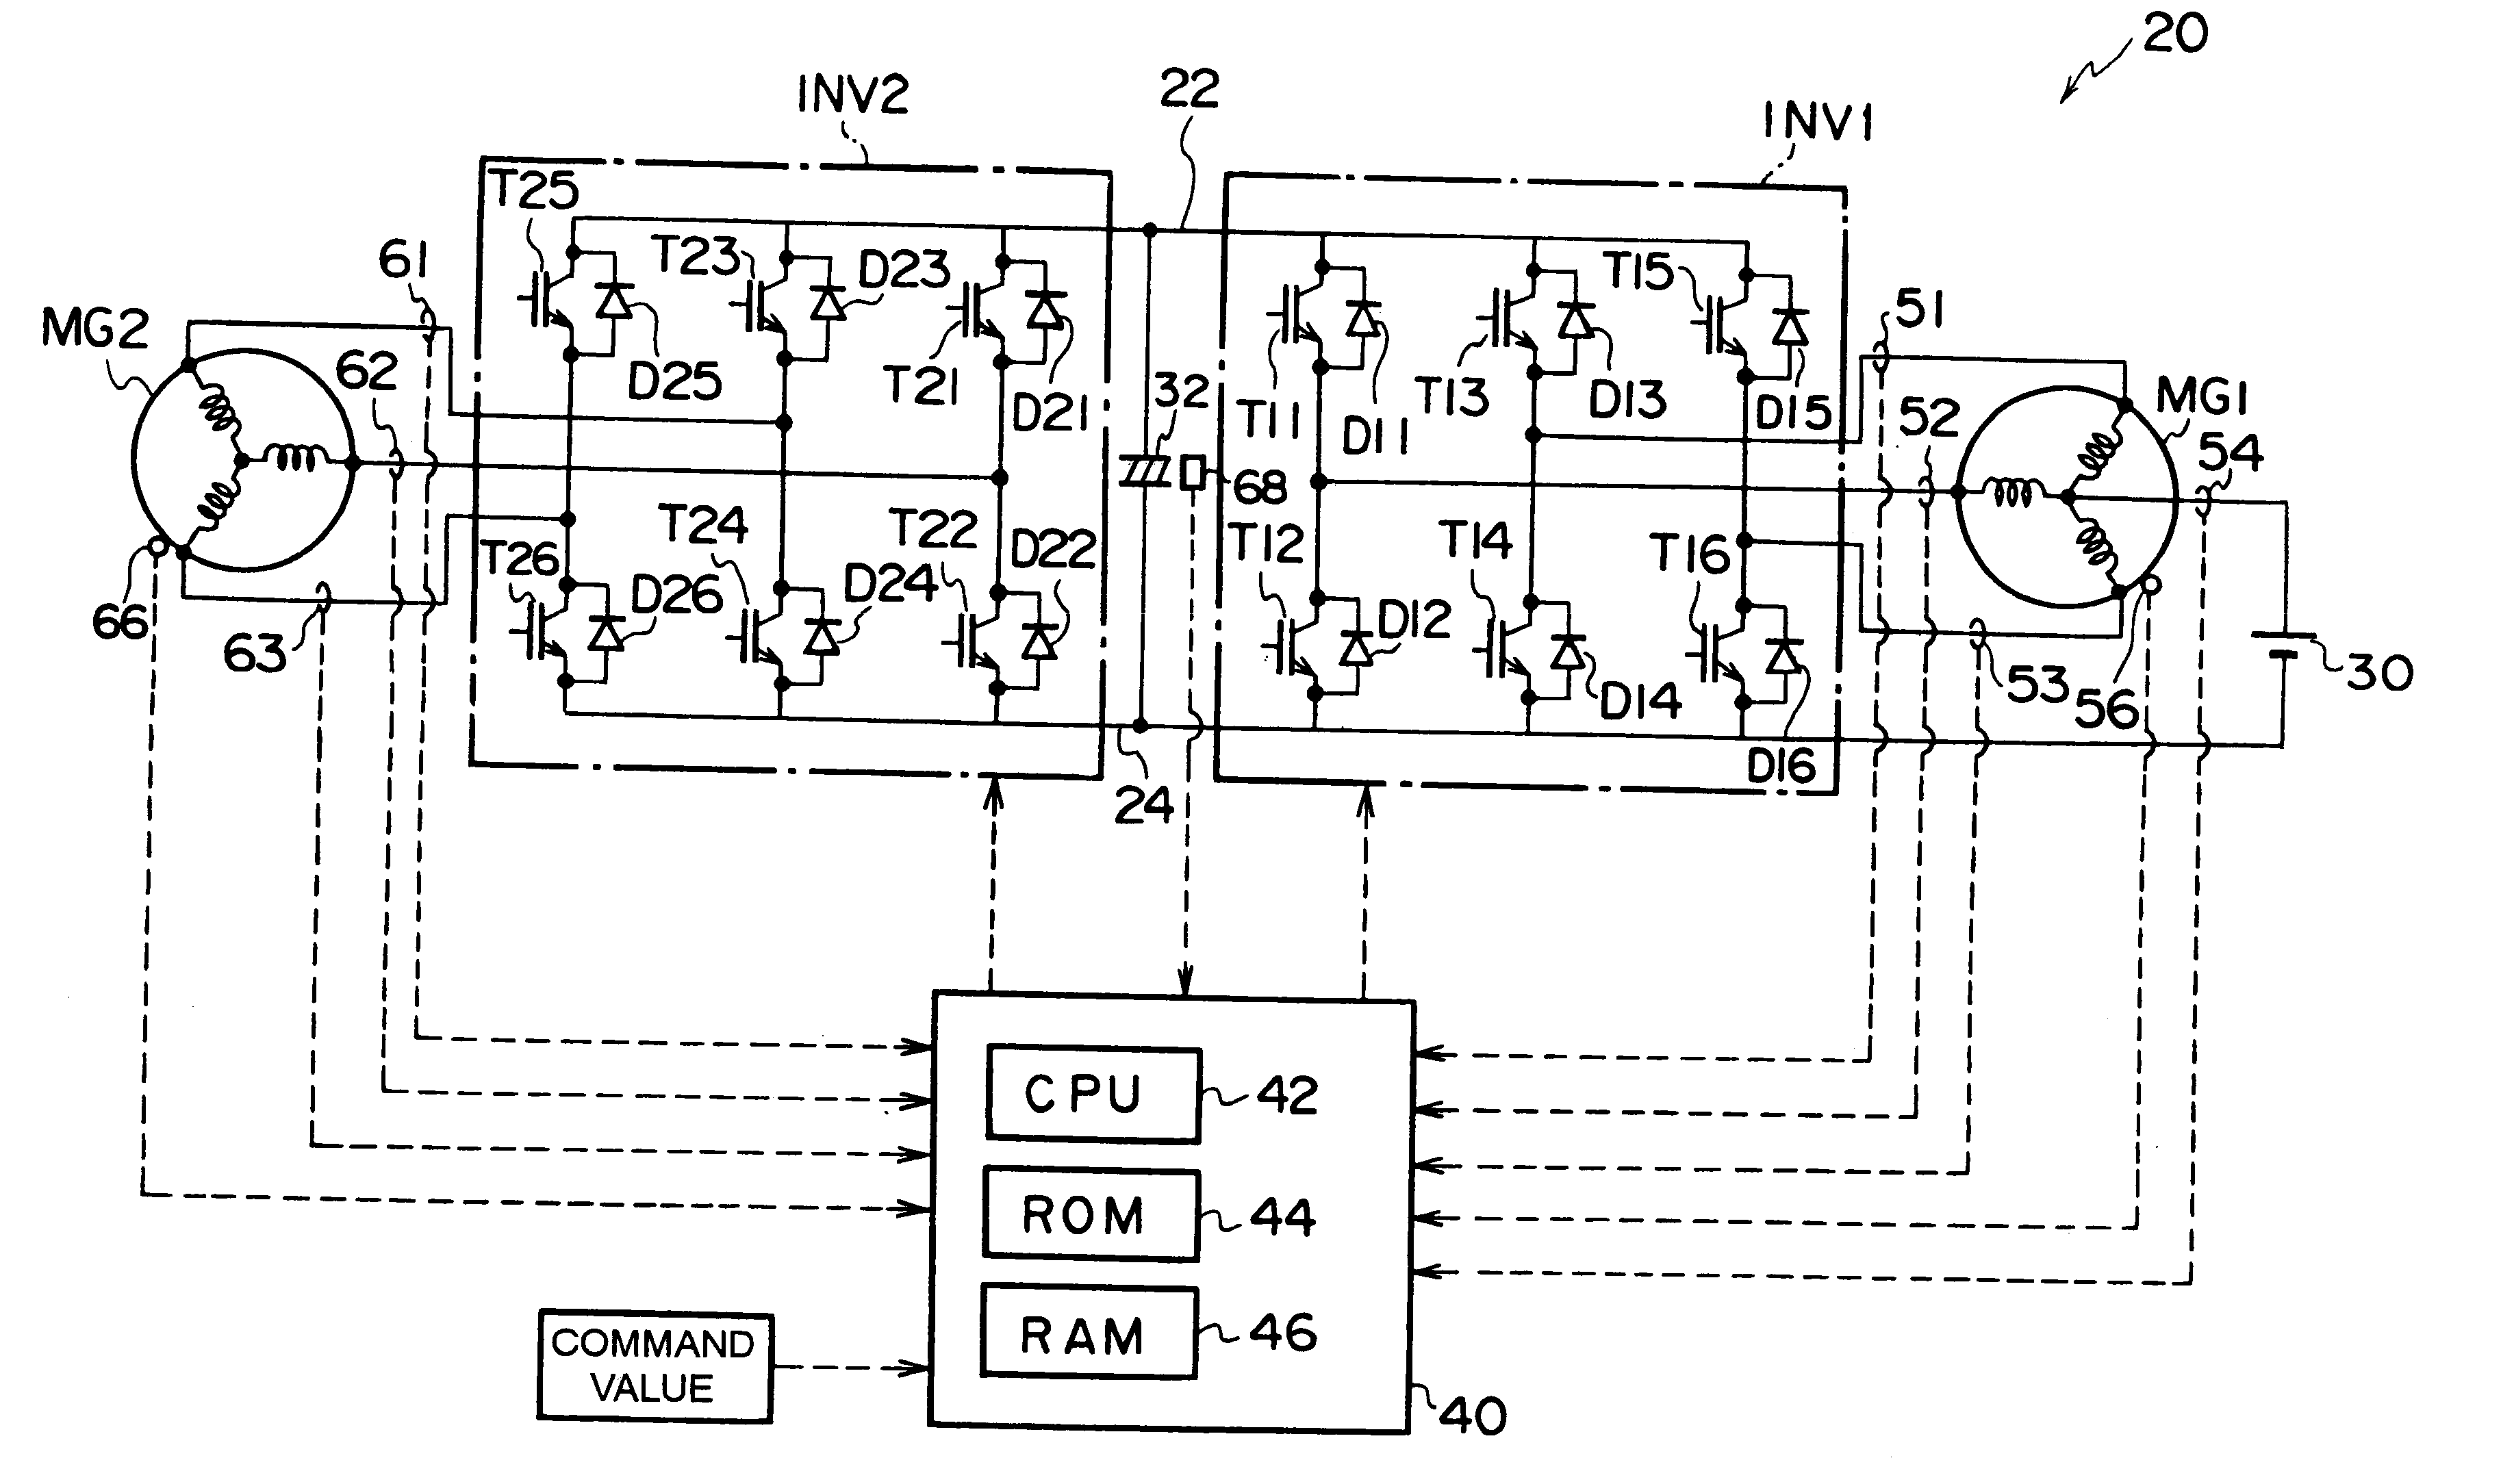 Mechanical power outputting apparatus and inverter apparatus